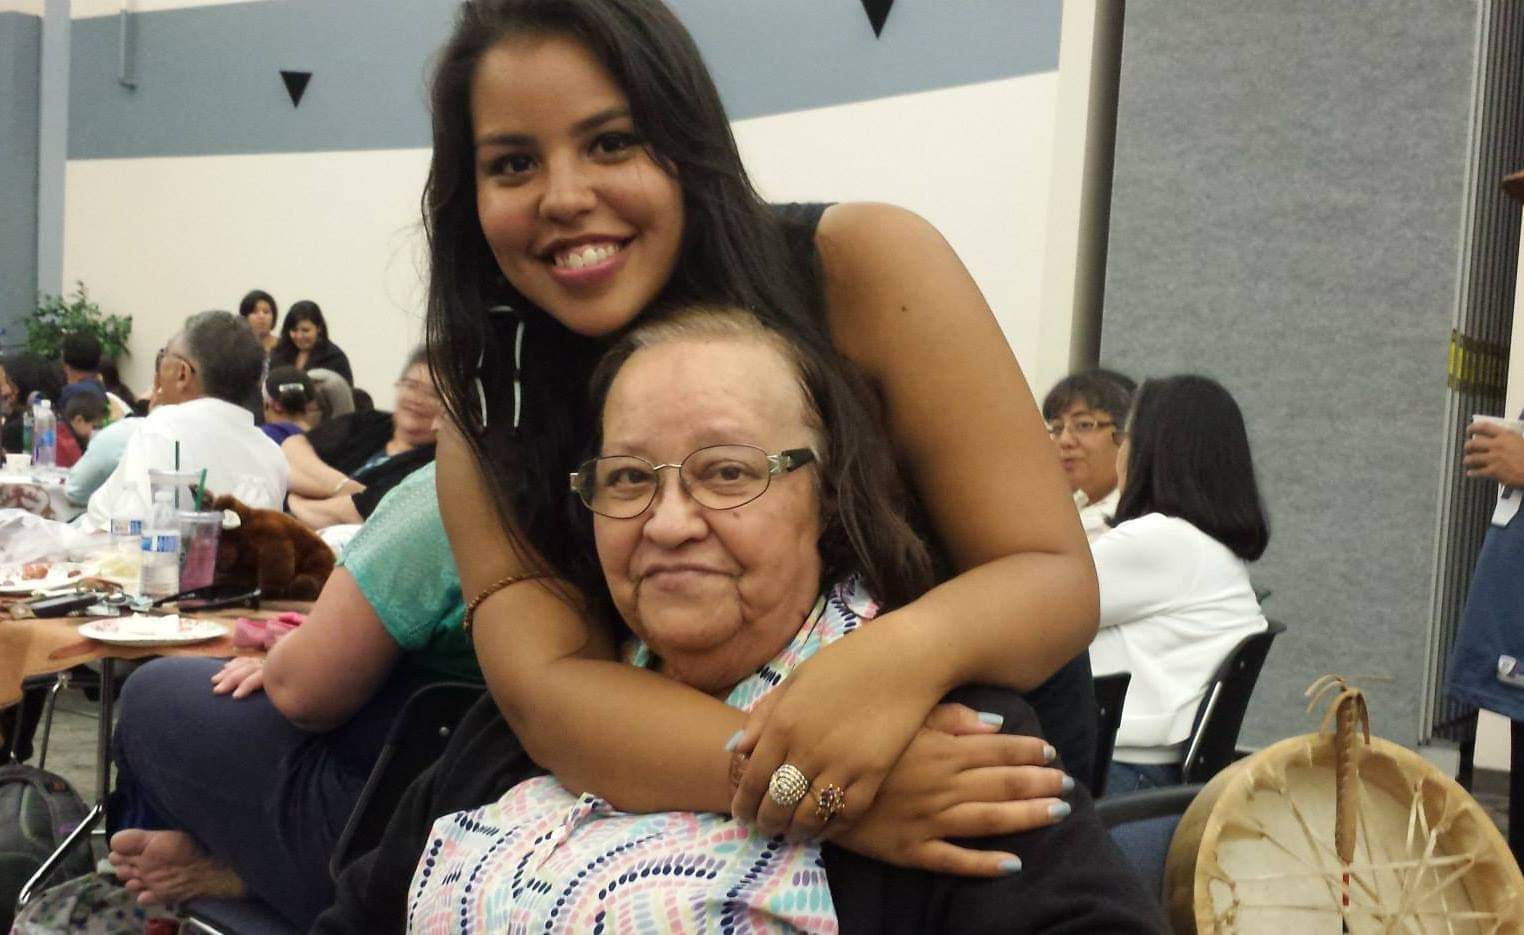 young woman leaning over and embracing older woman.  they are both smiling.